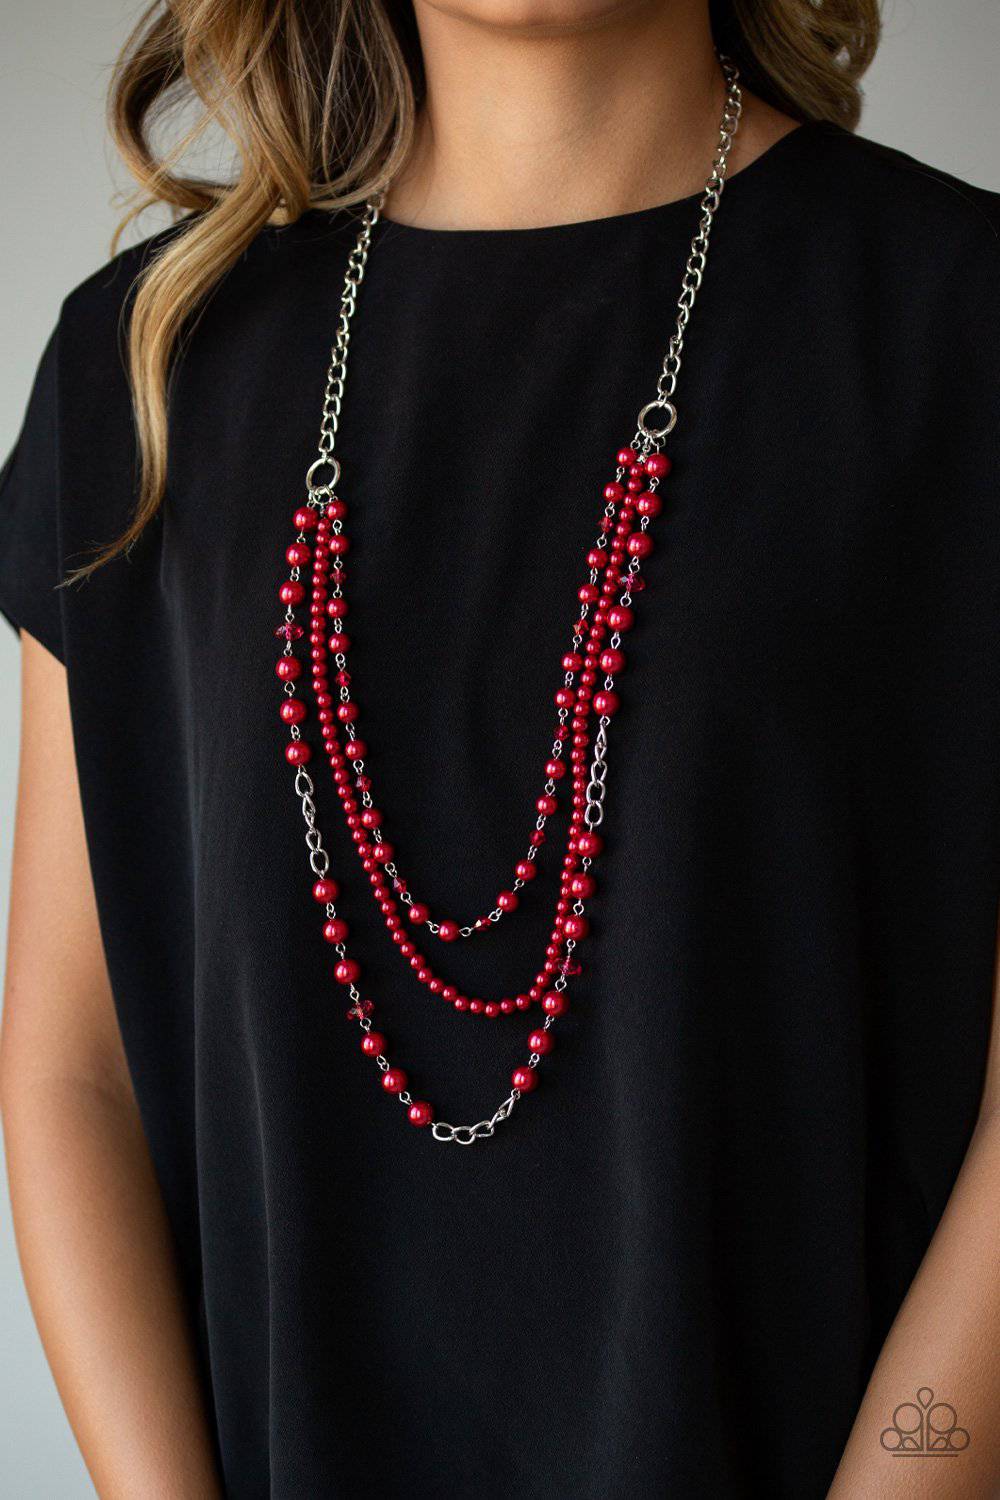 New York City Chic - Red Pearl Necklace - Paparazzi Accessories - GlaMarous Titi Jewels